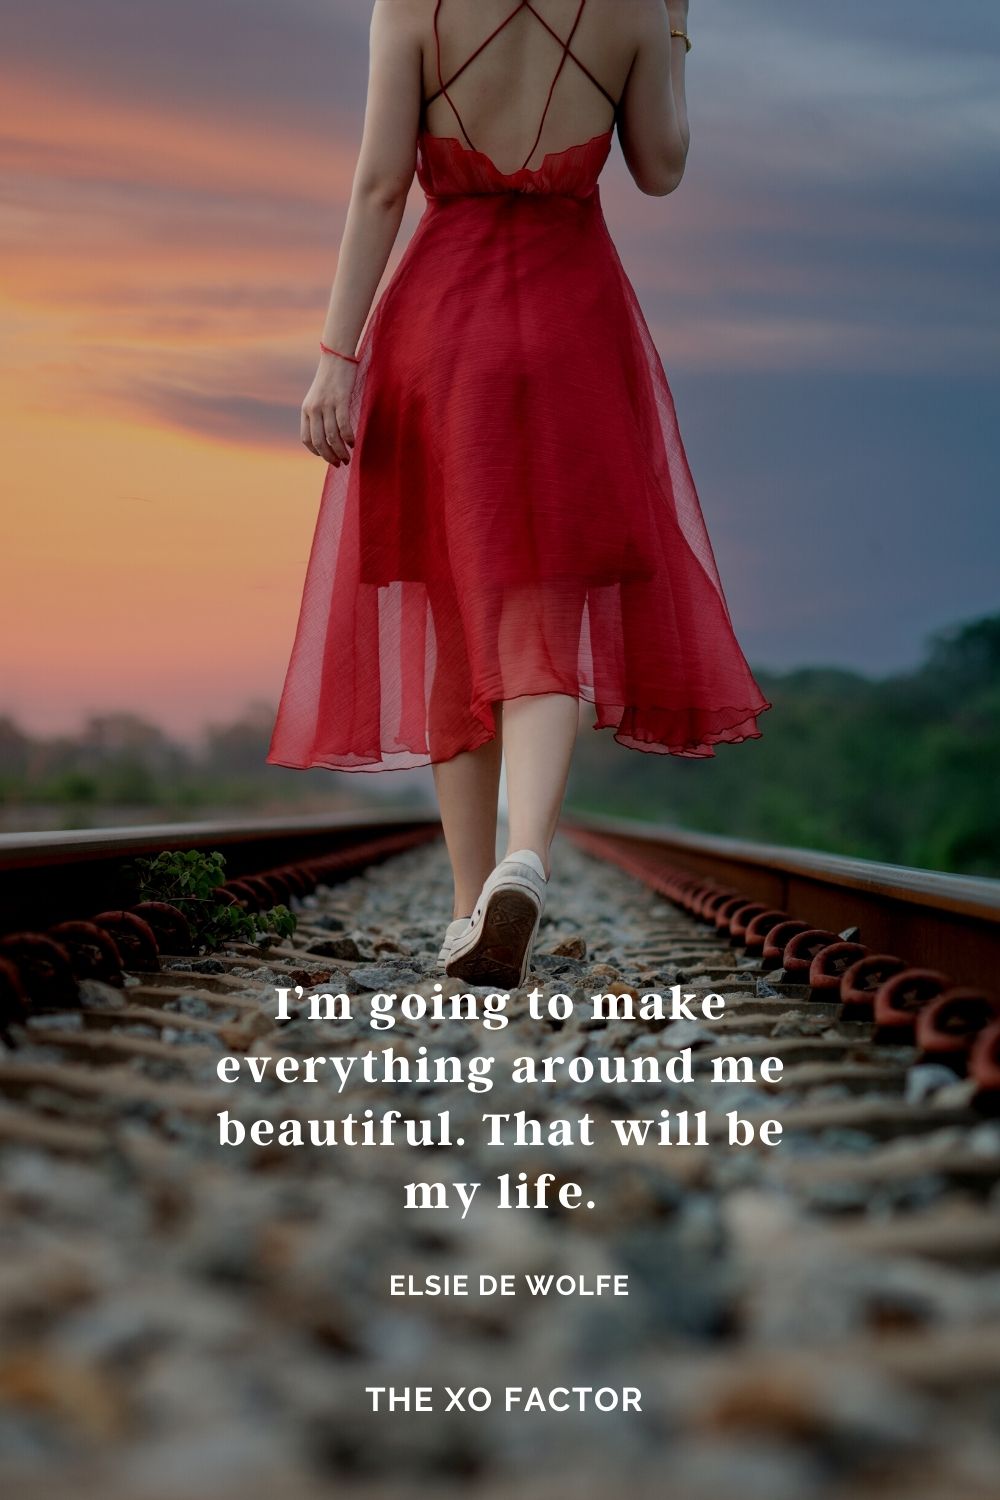 I’m going to make everything around me beautiful. That will be my life. Elsie de Wolfe